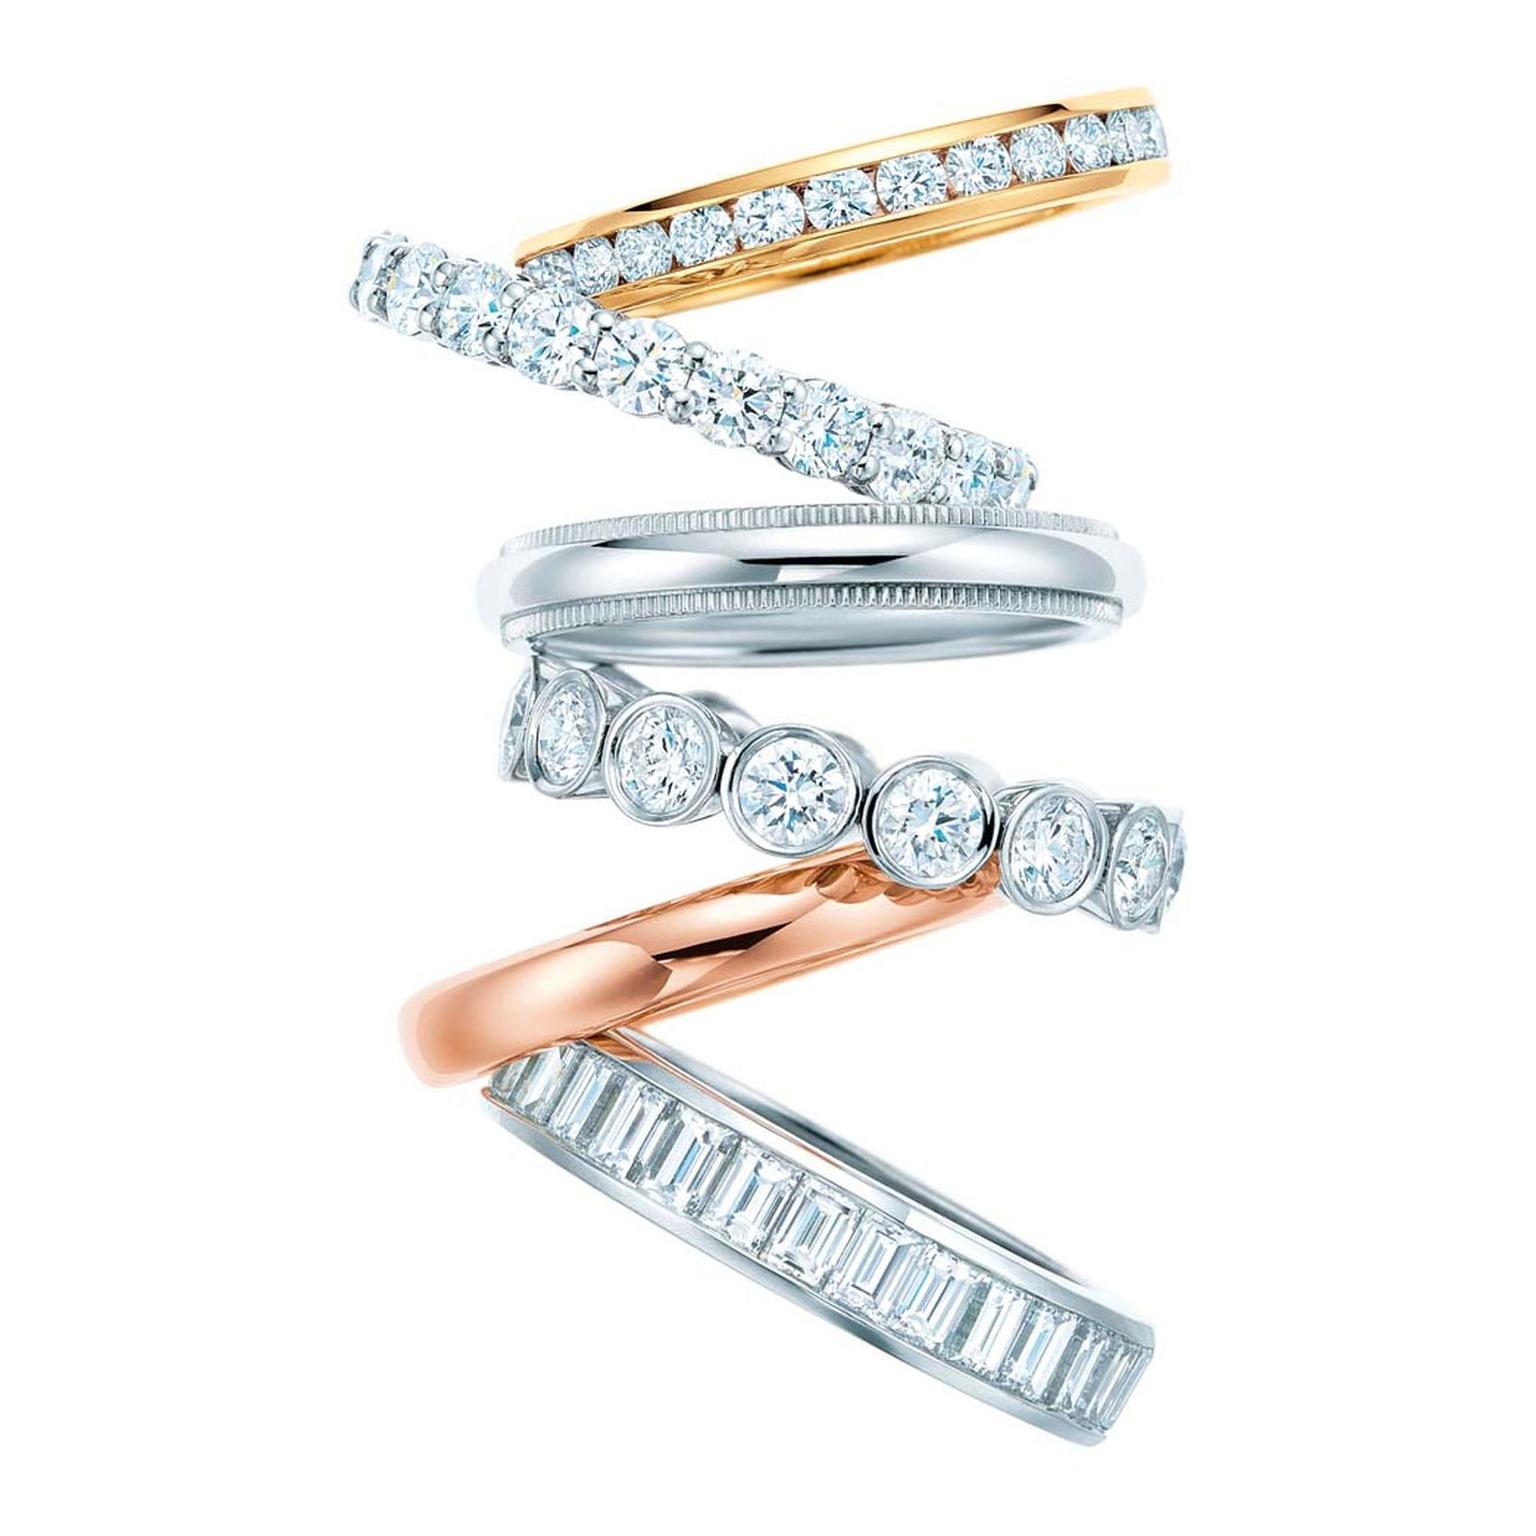 18k rose gold versions of some of Tiffany's classic collections are also available, including the Migrain, Lucida and Jazz collections.